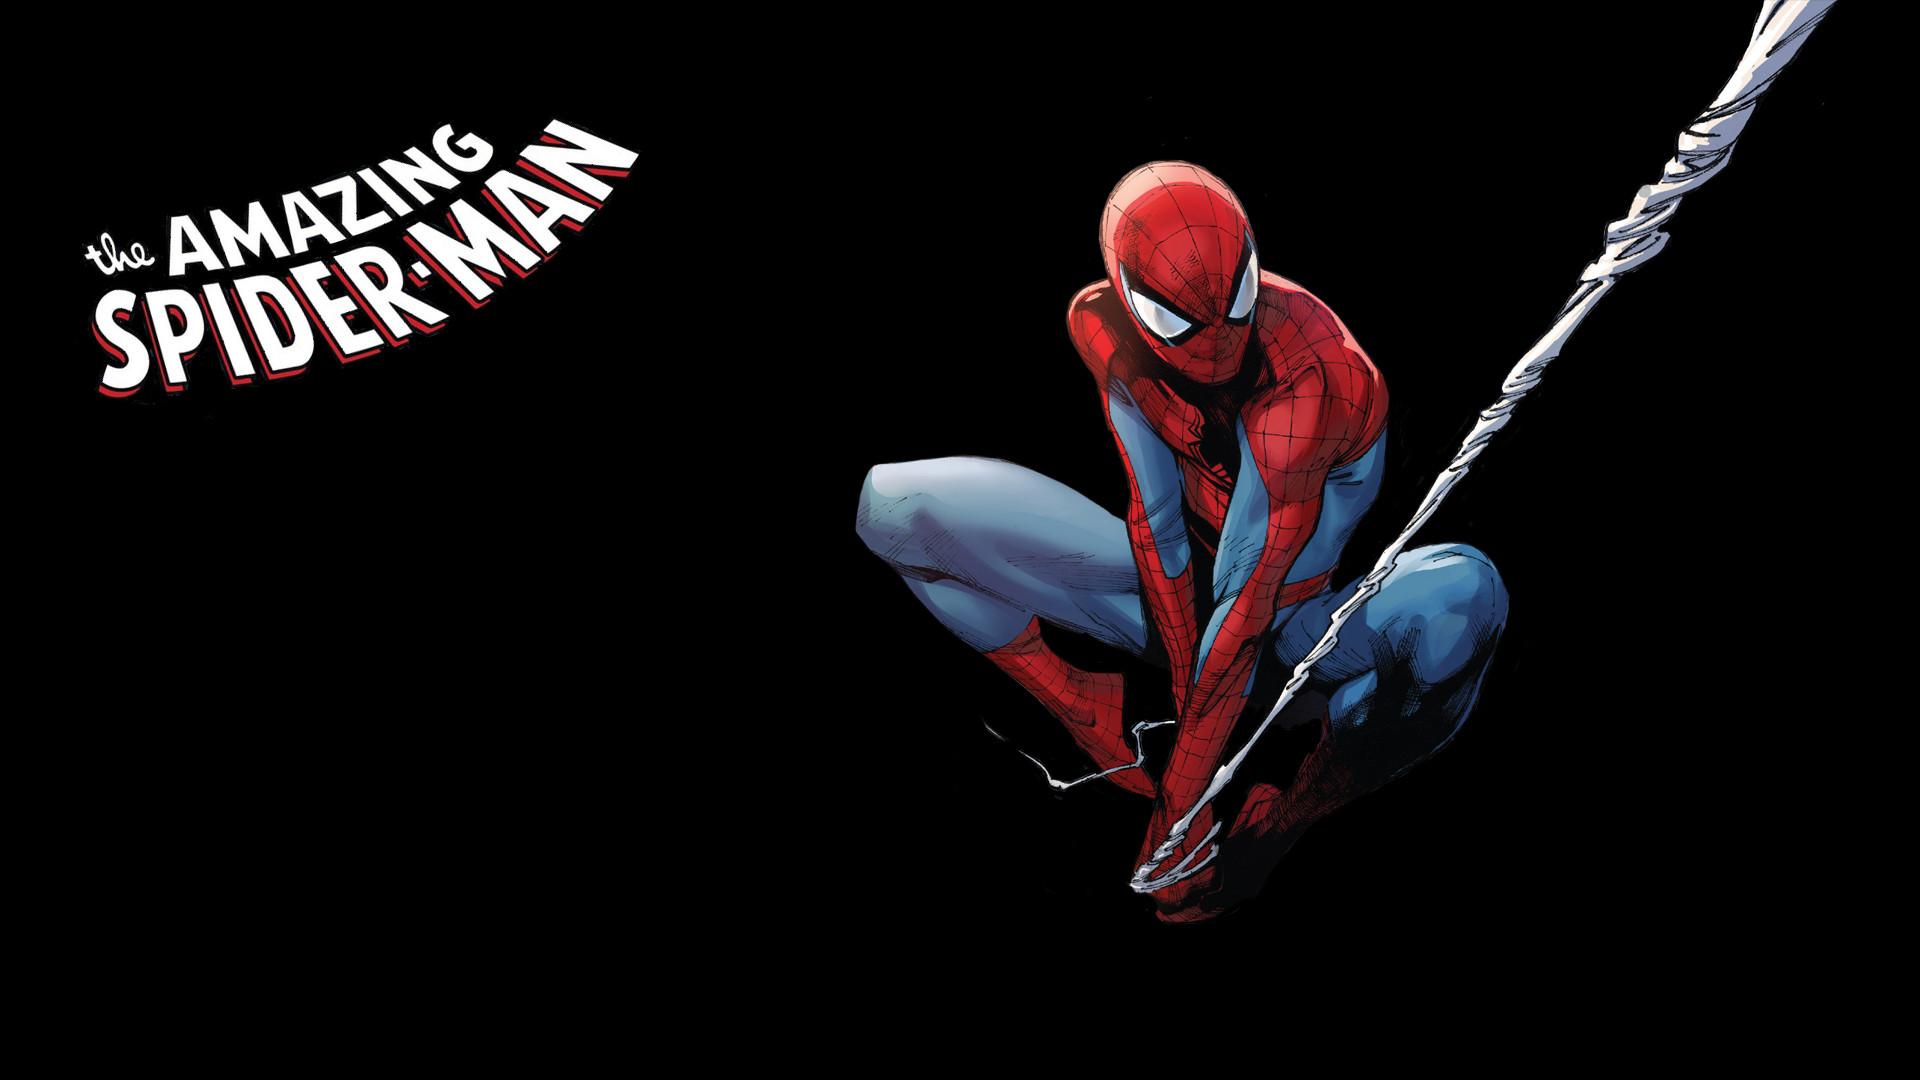 1920x1080 The Amazing Spider-Man Wallpapers, Pictures, Images